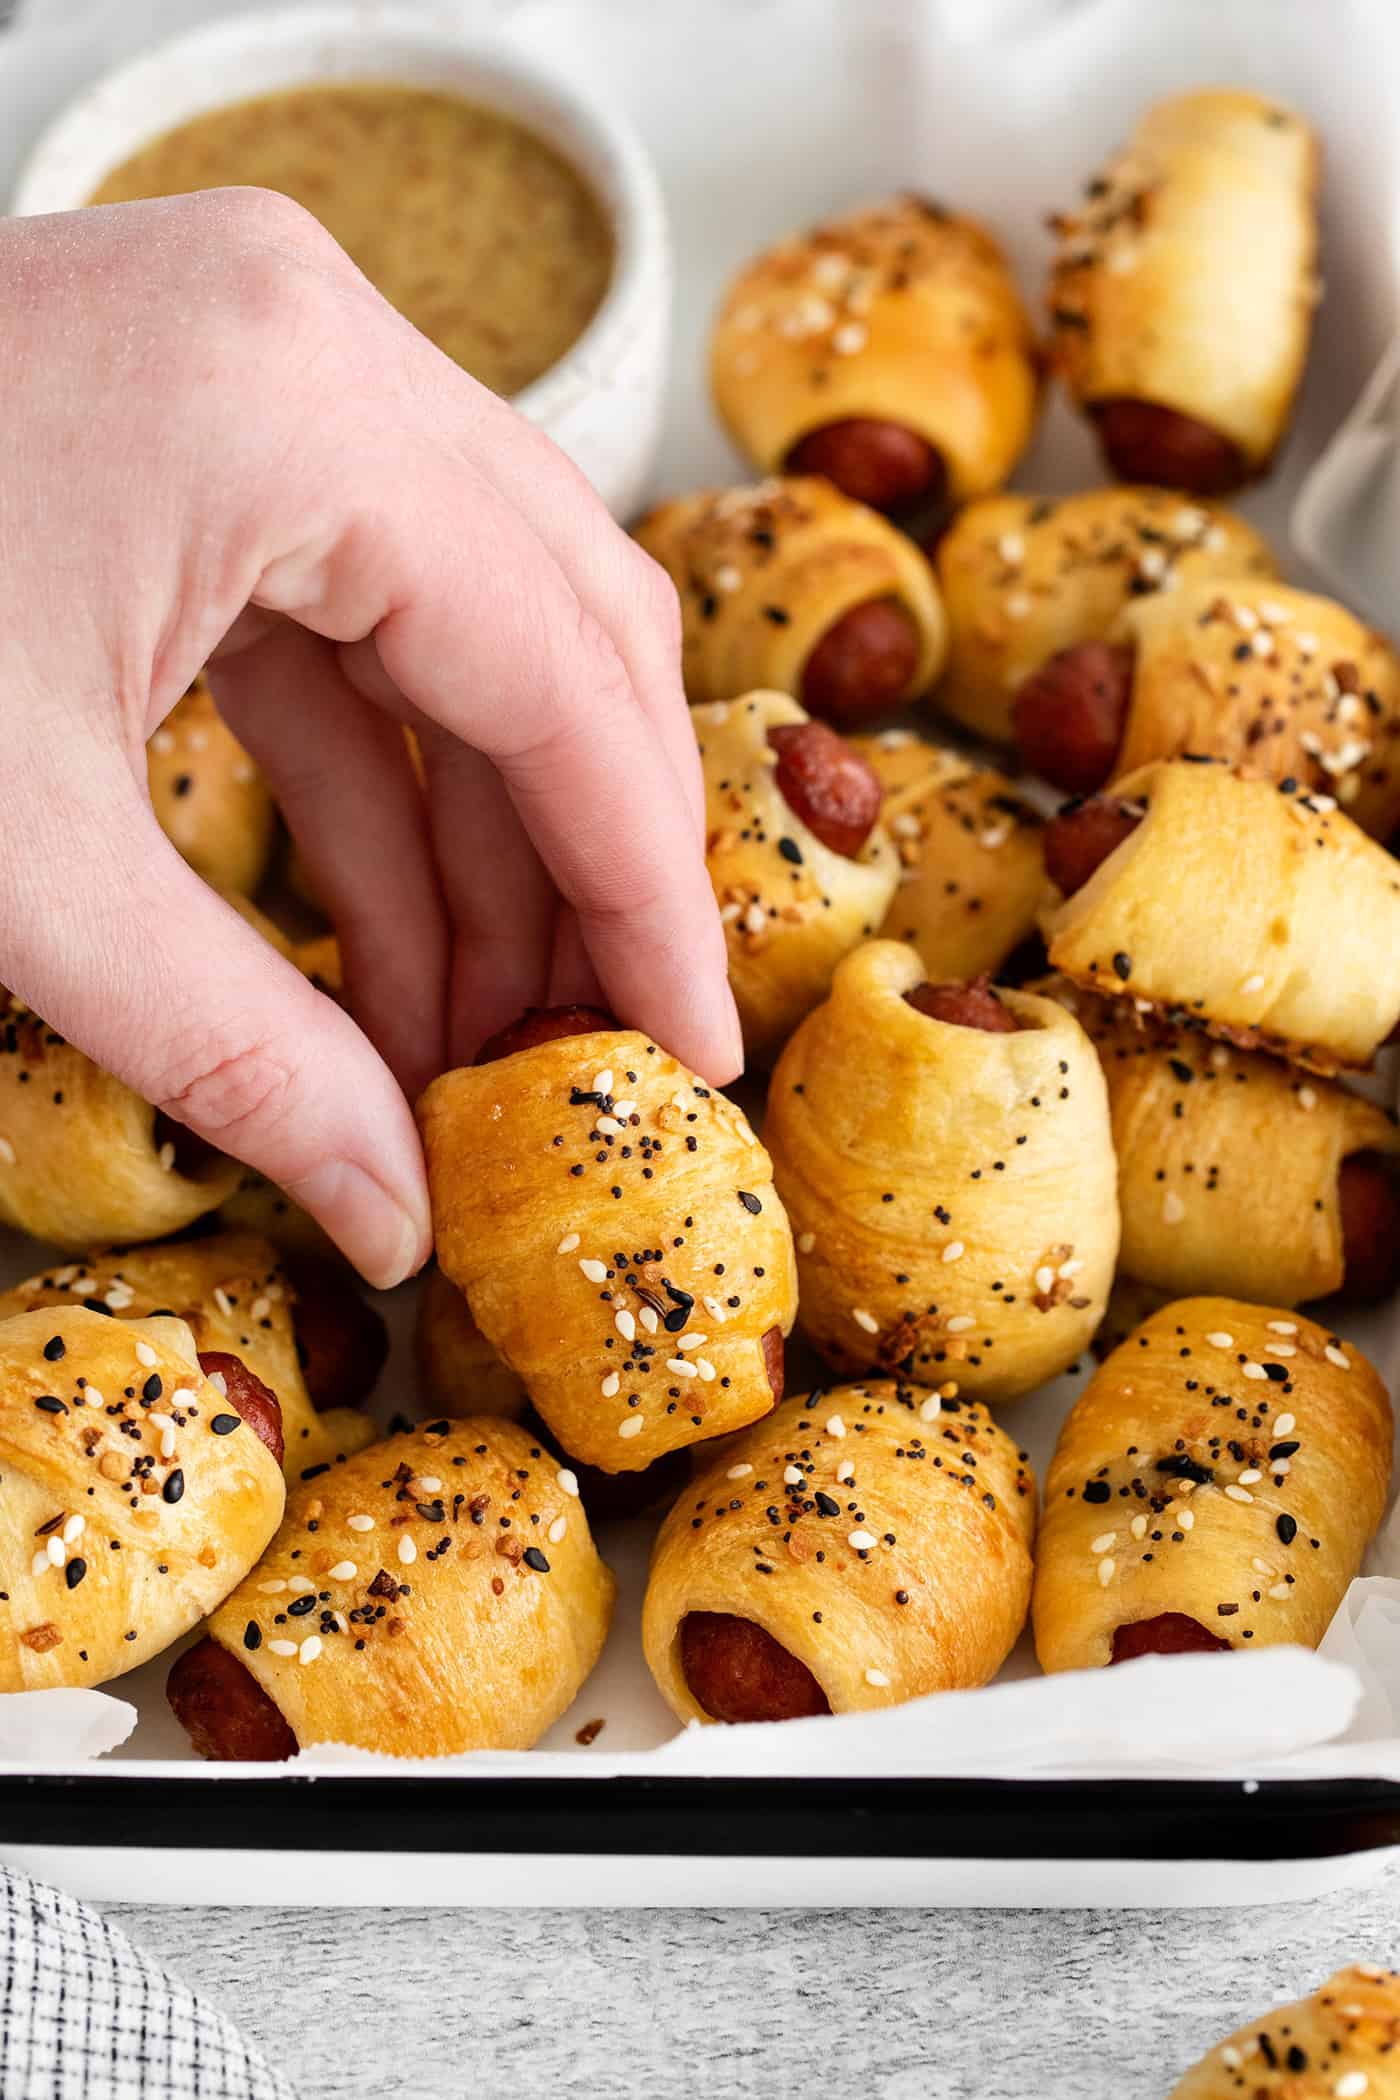 A hand grabbing a mini pigs in a blanket